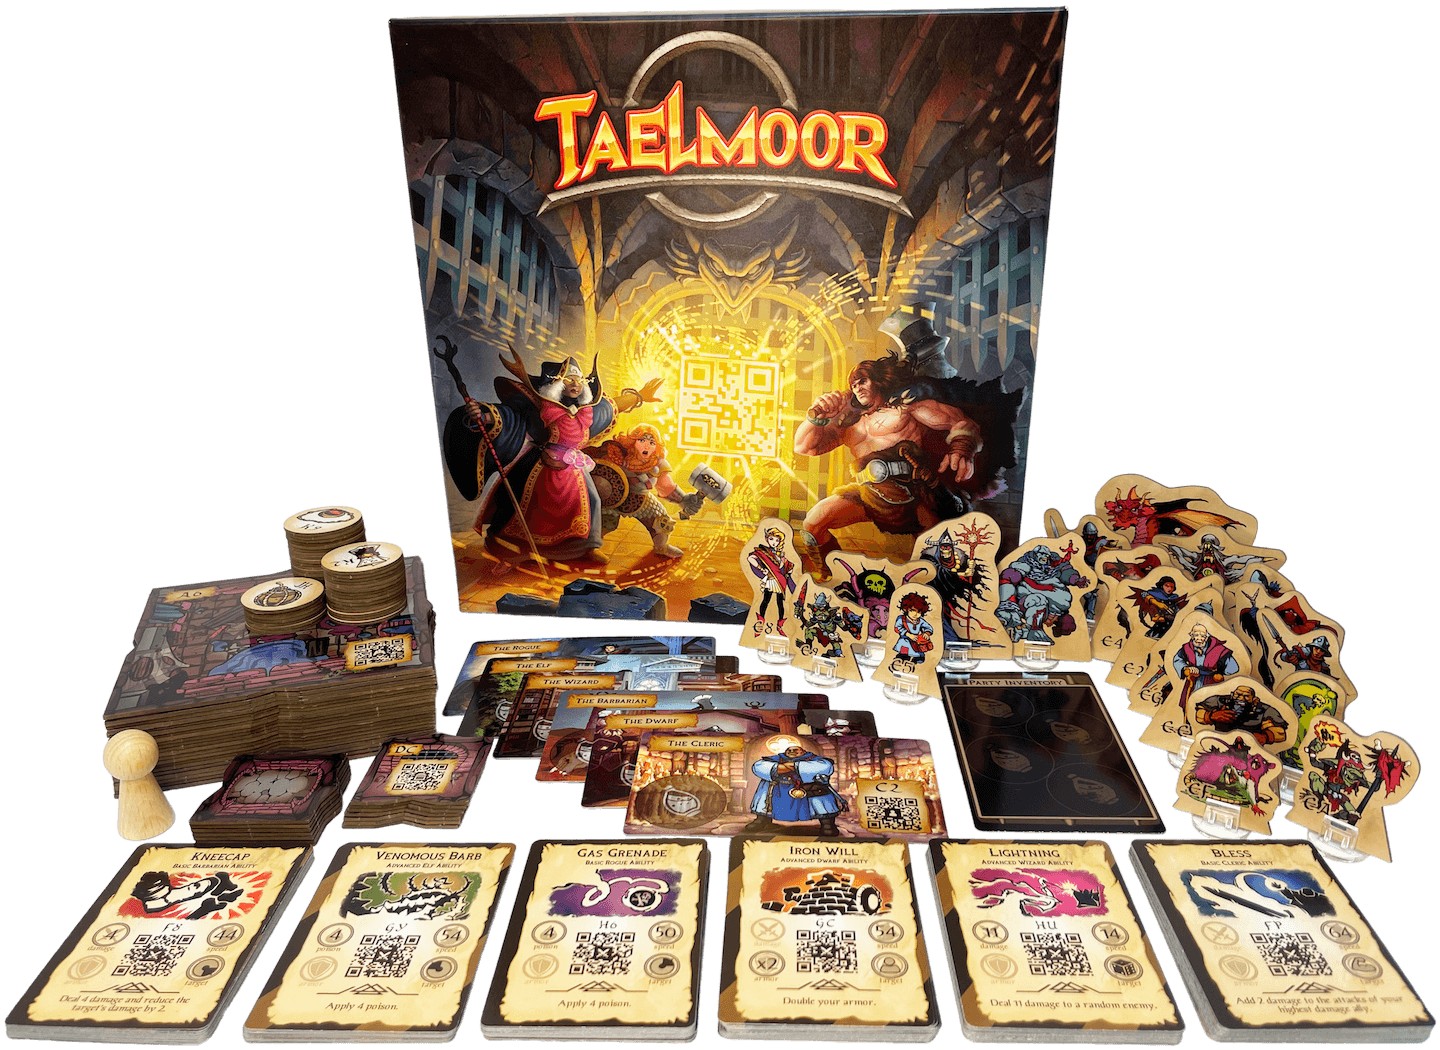 The complete set of Taelmoor pieces